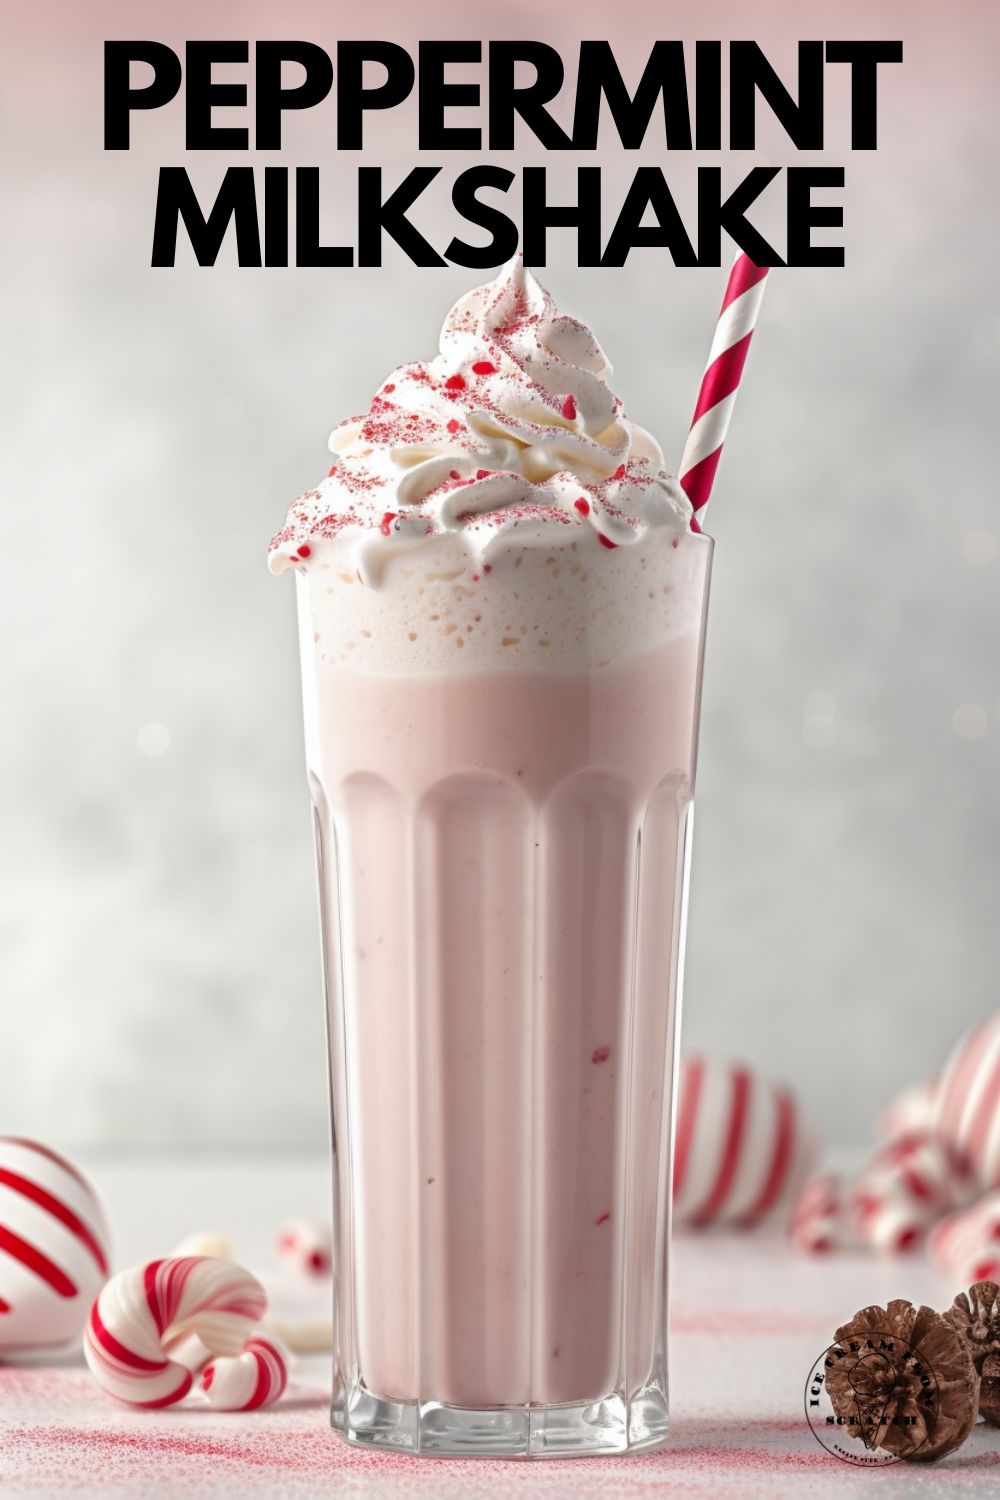 a tall glass filled with peppermint milkshake with a red and white striped straw and whipped cream topping. Text overlay says "peppermint milkshake"